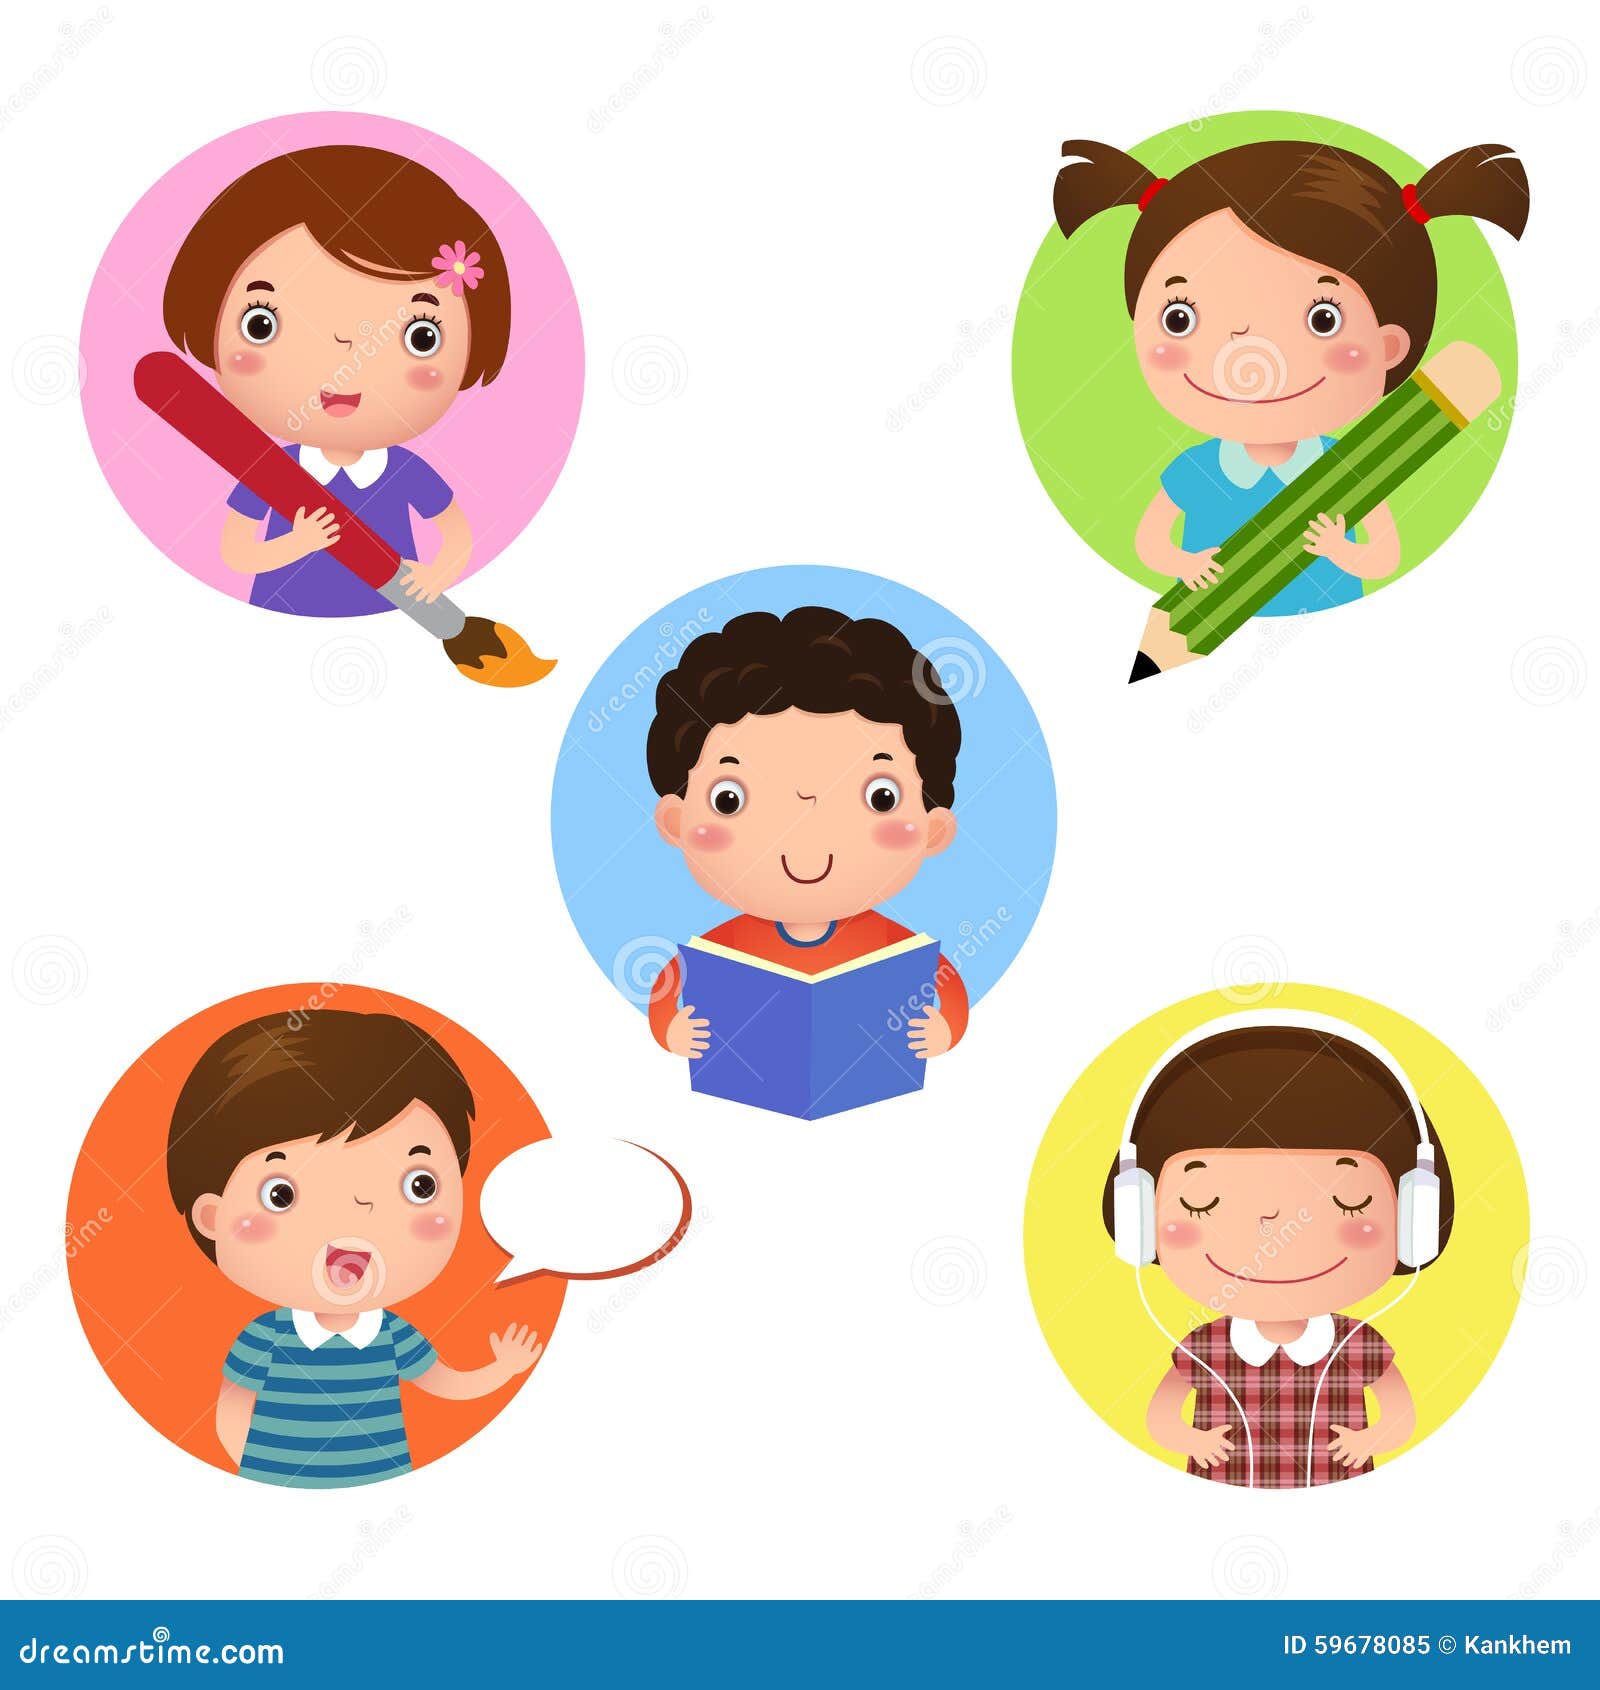 set of kids mascot learning. icon for writing, drawing, reading,